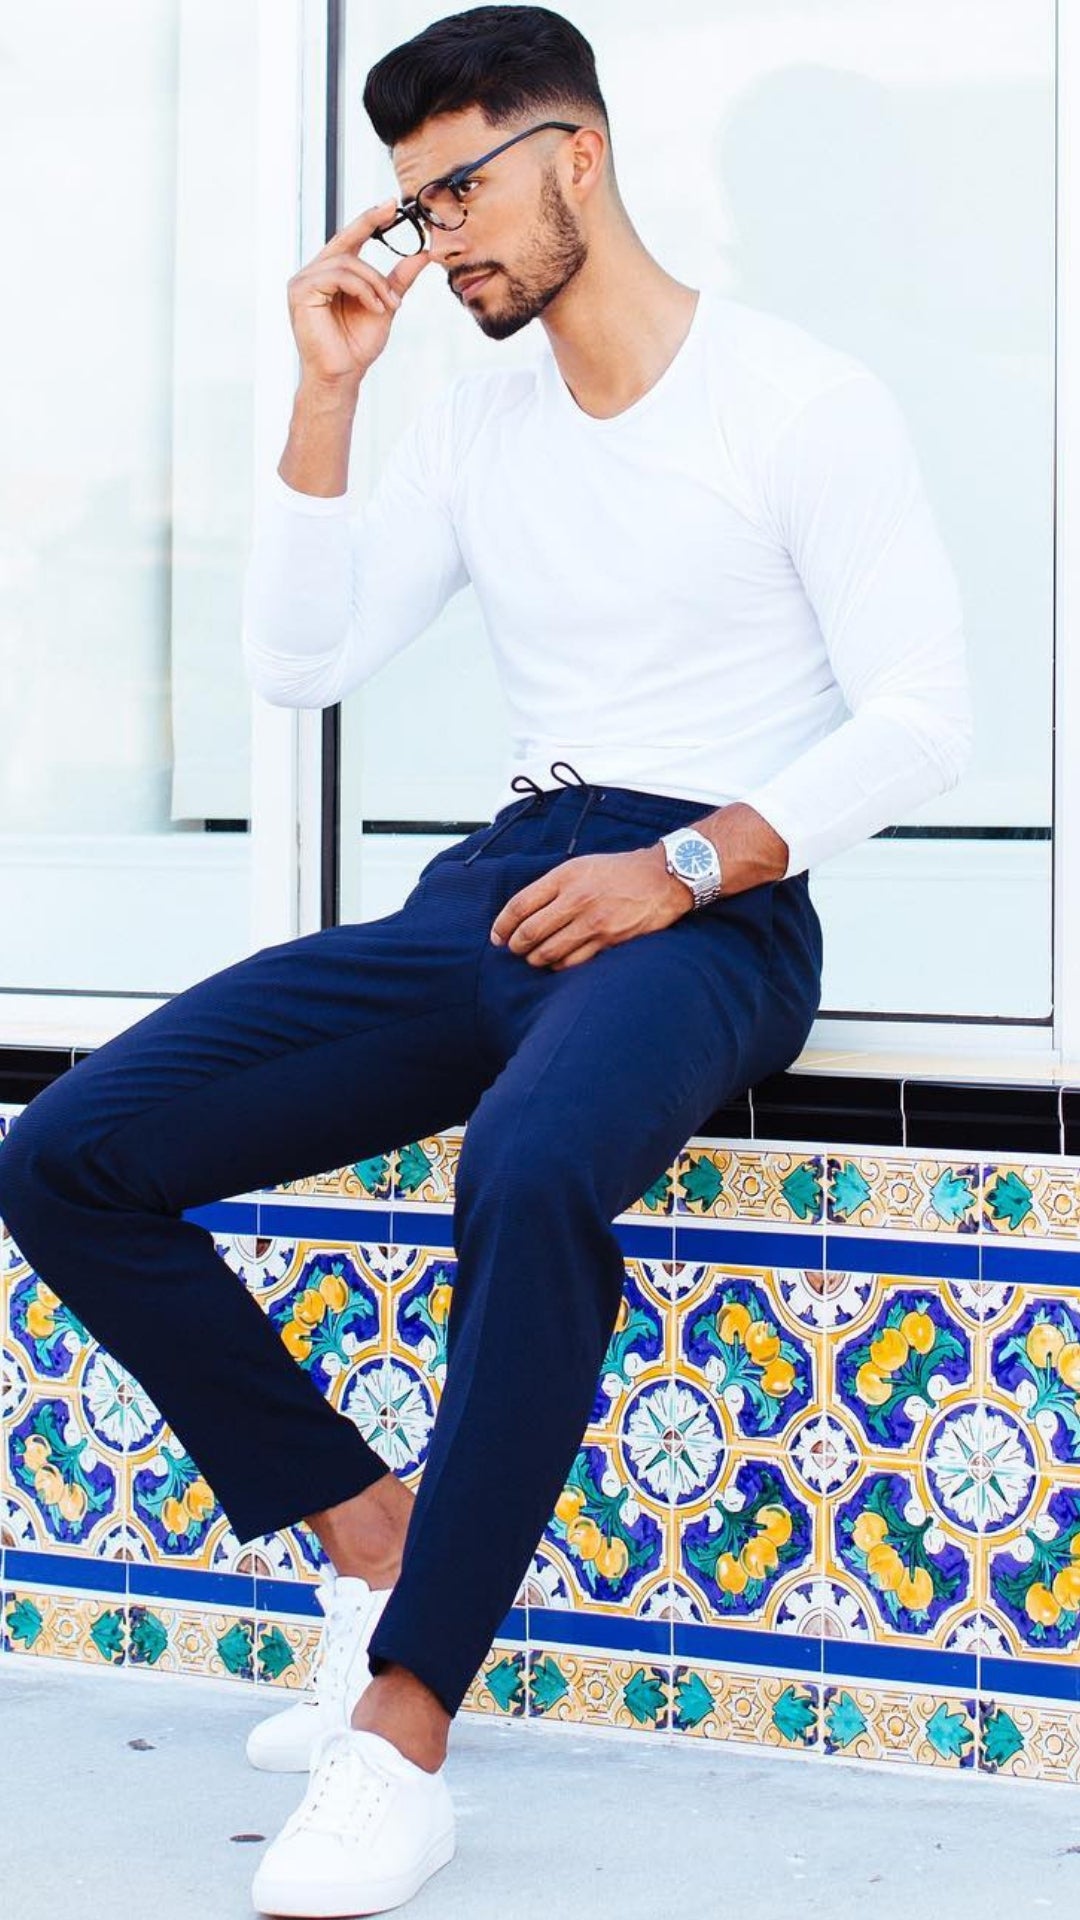 5 Casual Outfit Ideas I'm Stealing From Jose Zuniga #casual #outfits #streetstyle #mensfashion